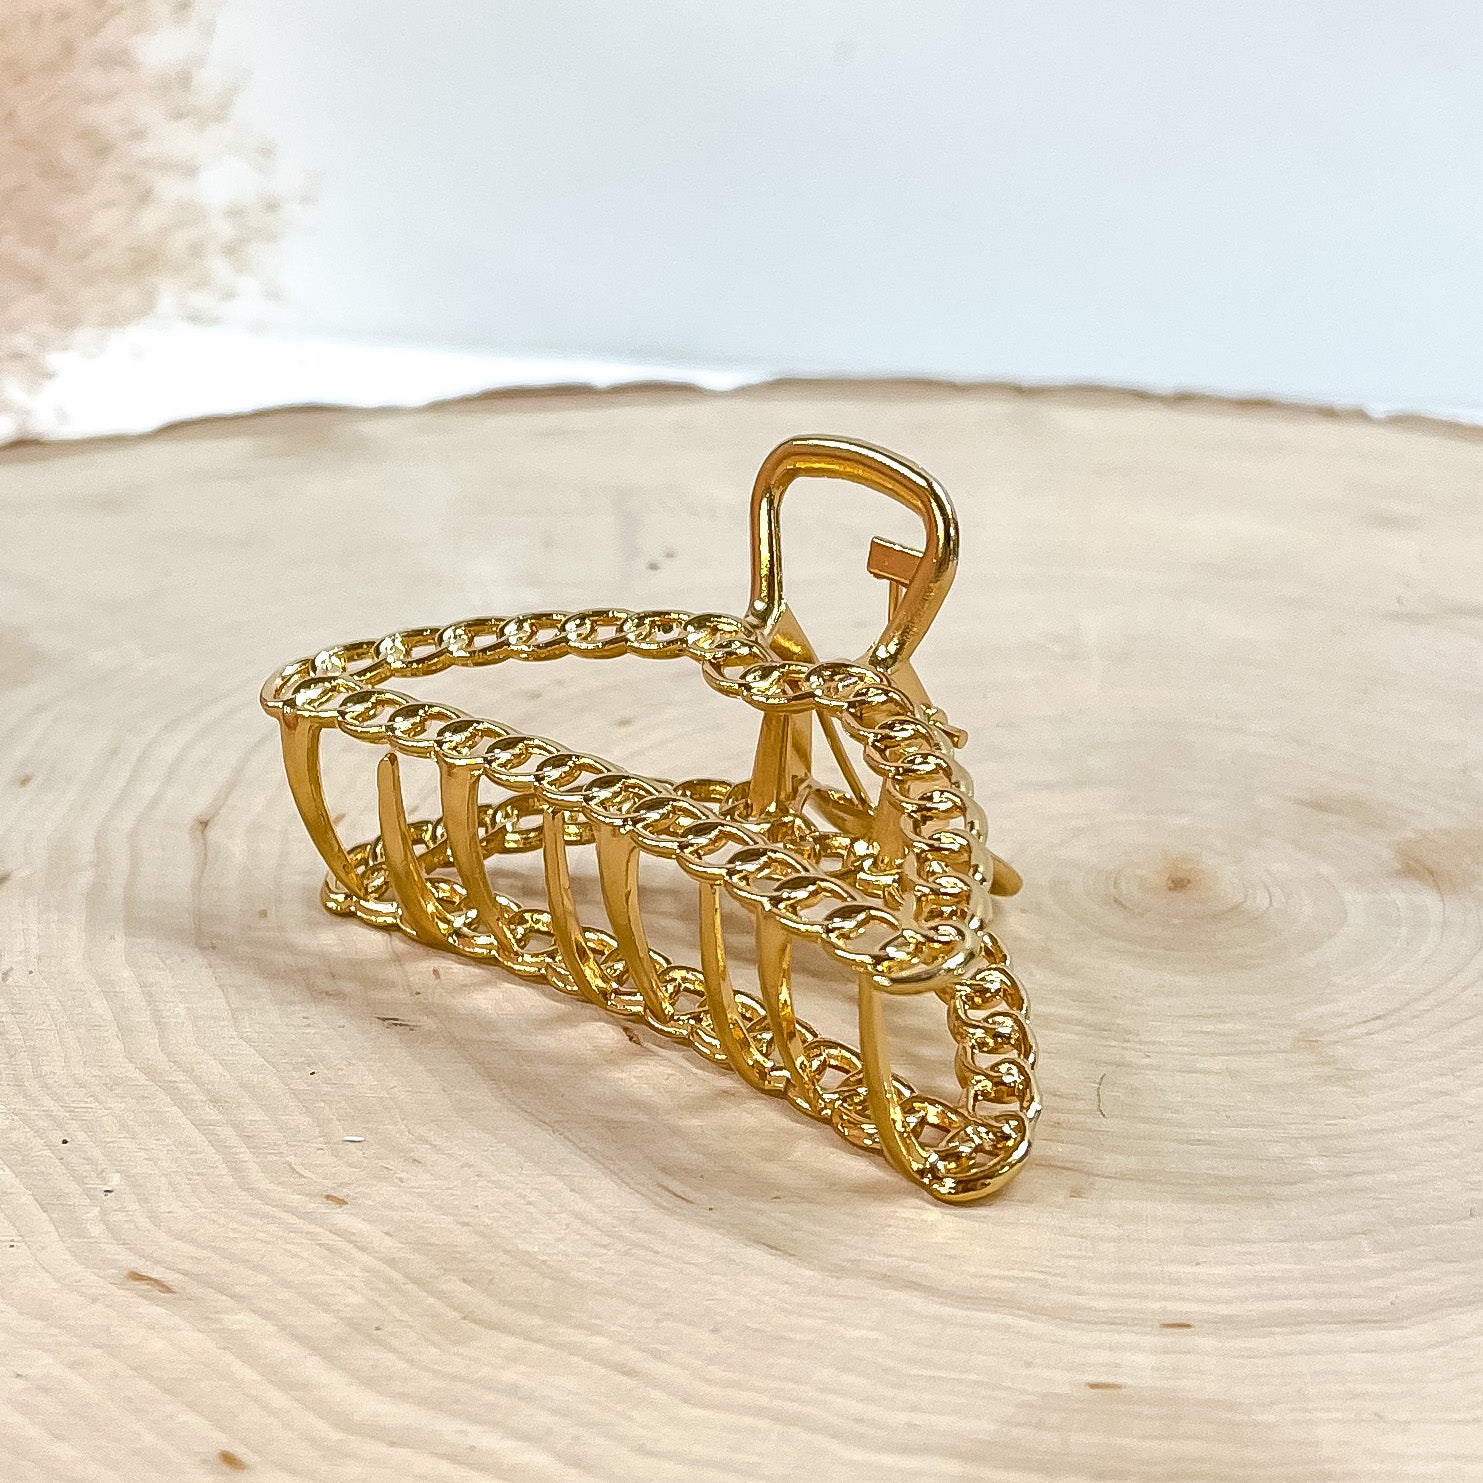 This is a small dome shaped hair clip with chain texture in gold. This hair  clip is laying on a slab of wood with a beige plant in the side as decor.